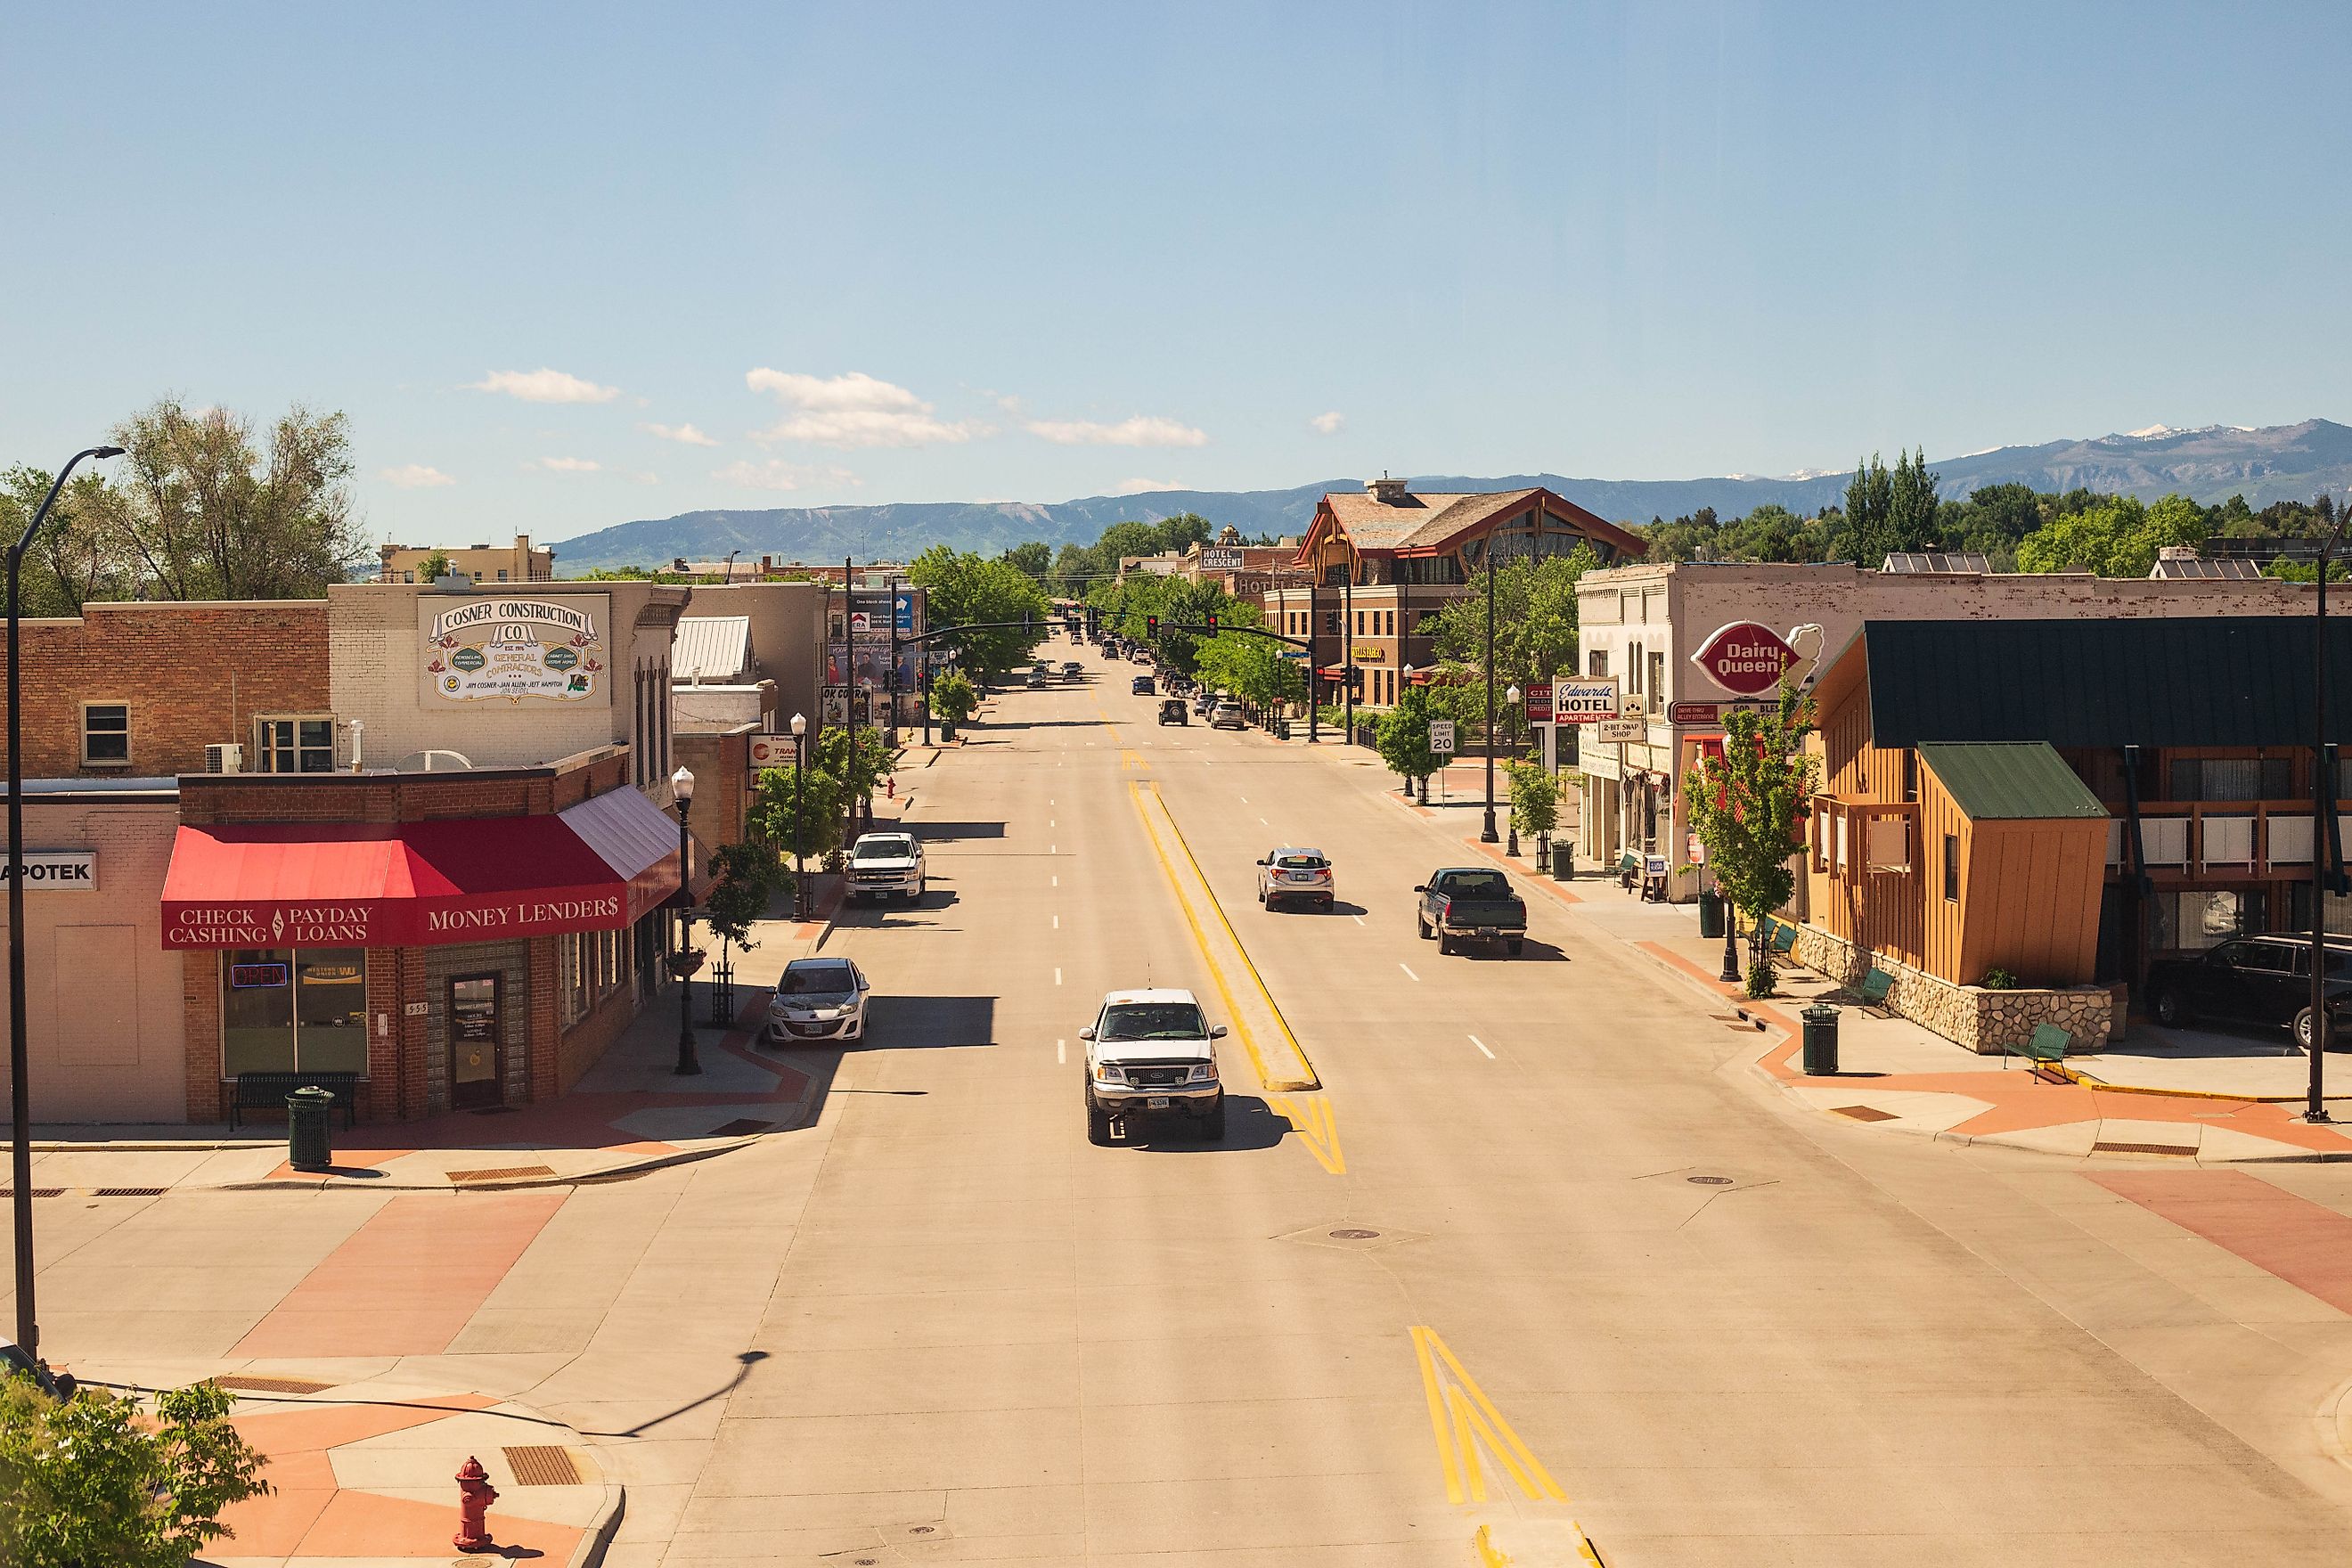 8 Oldest Founded Towns To Visit In Wyoming - WorldAtlas